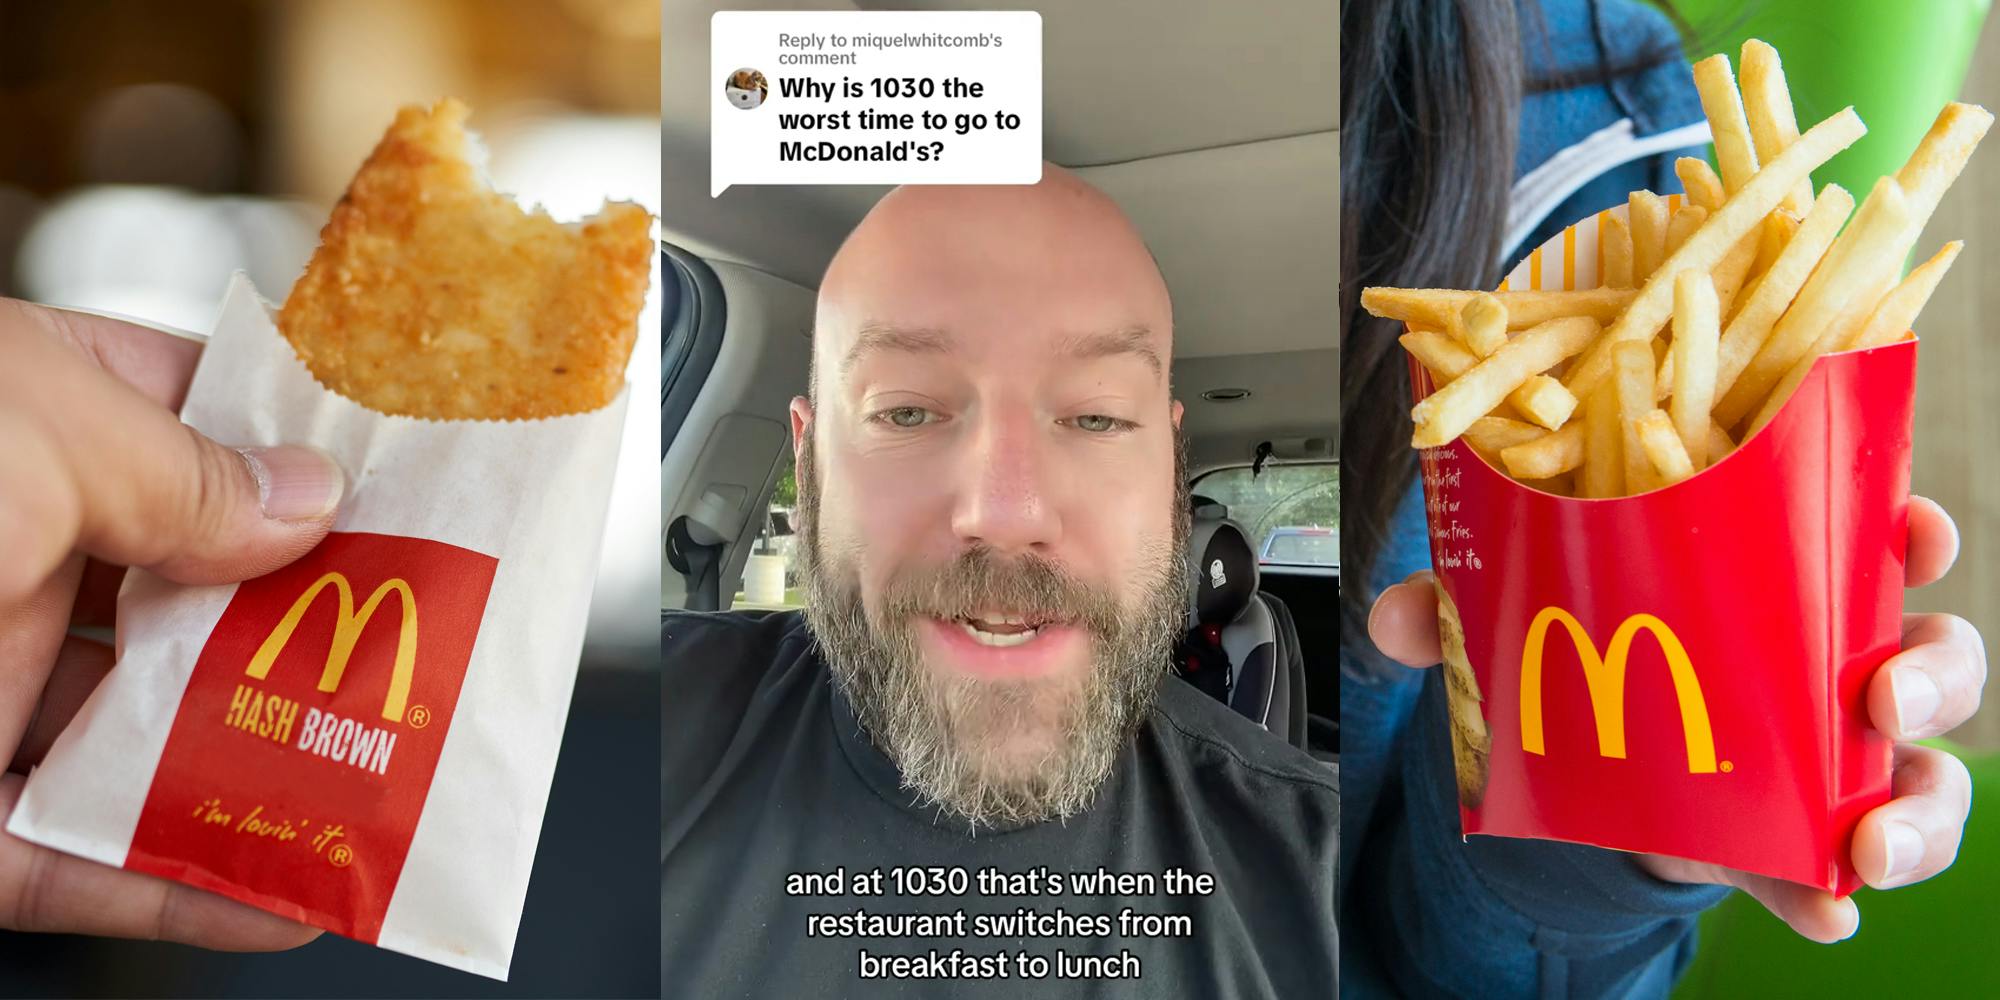 hand holding McDonald's hashbrown (l) former McDonald's corporate chef speaking in car with caption "Why is 1030 the worst time to go to McDonald's? and at 1030 that's when the restaurant switches from breakfast to lunch" (c) hand holding McDonald's french fries (r)